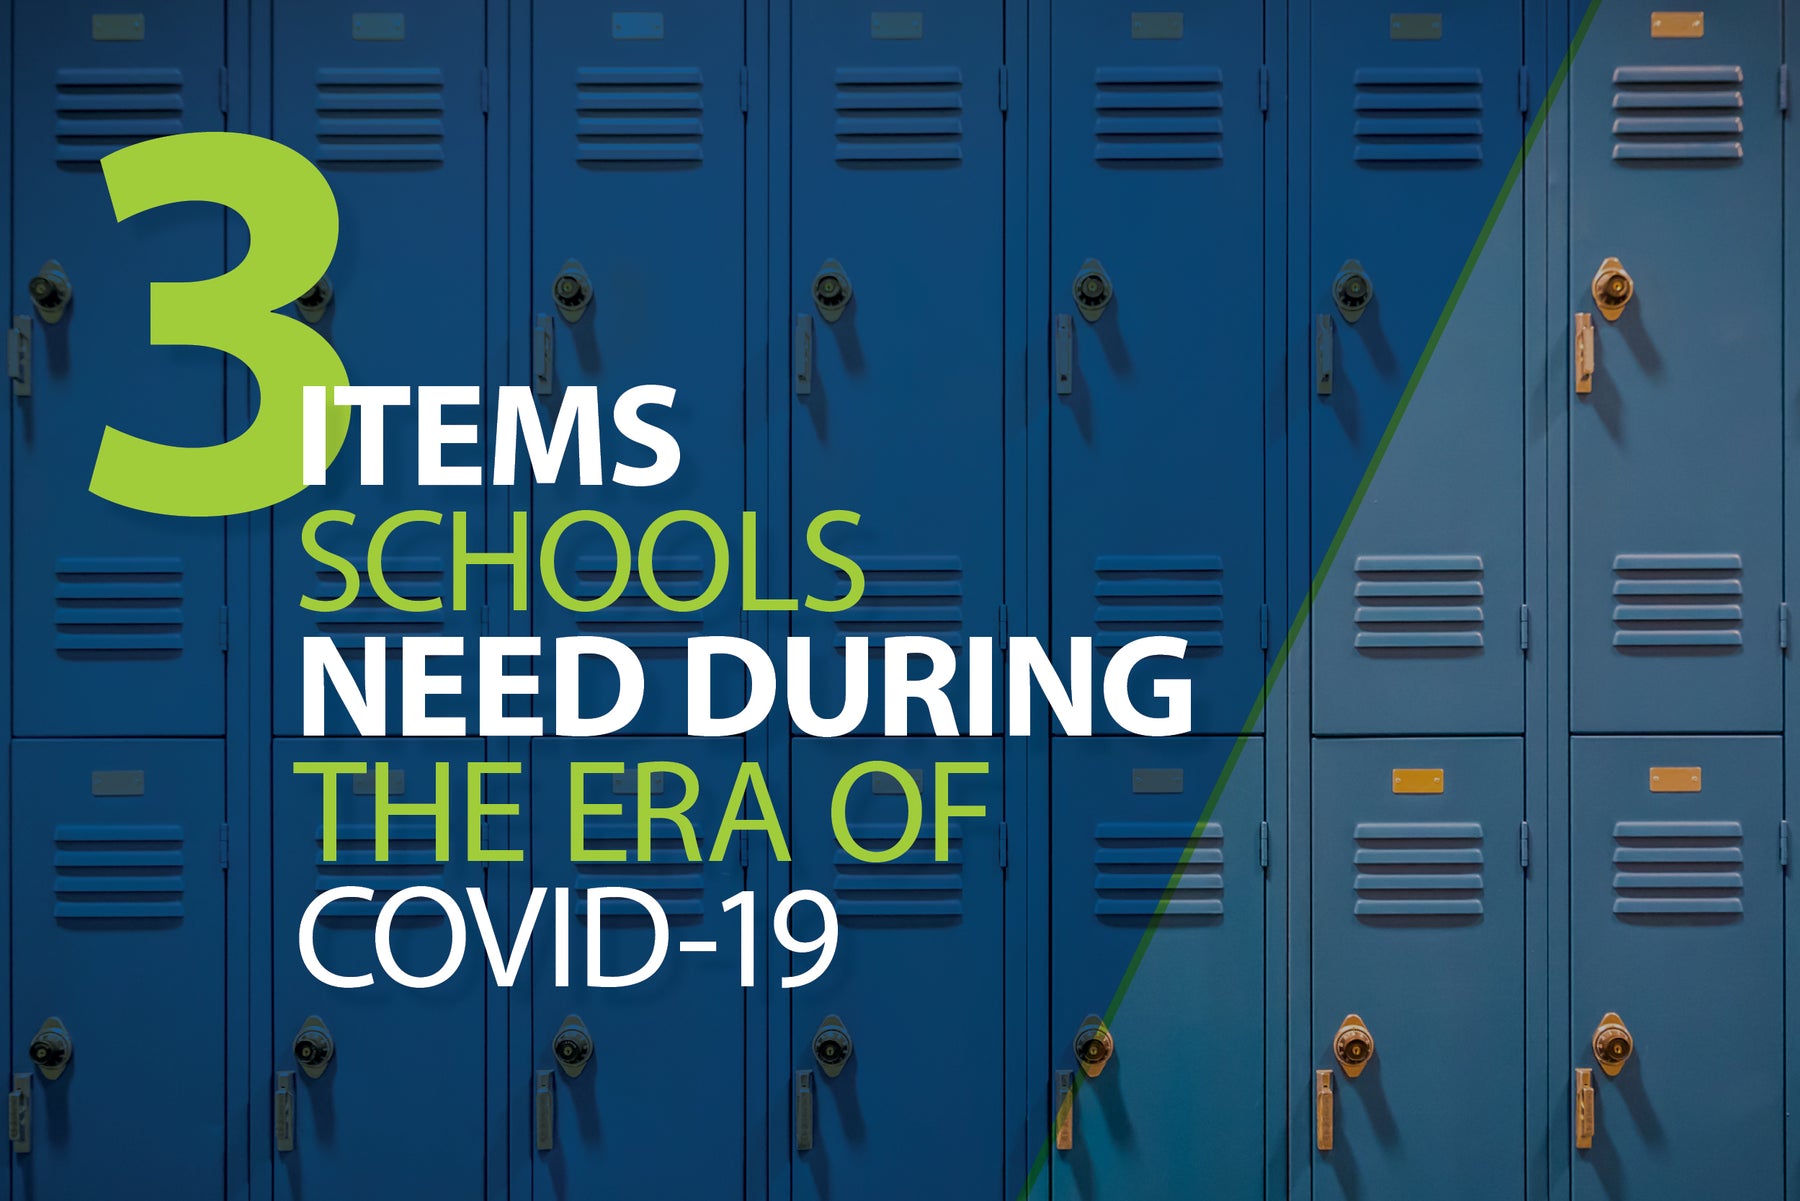 3 Items Schools Need During the Era of COVID-19